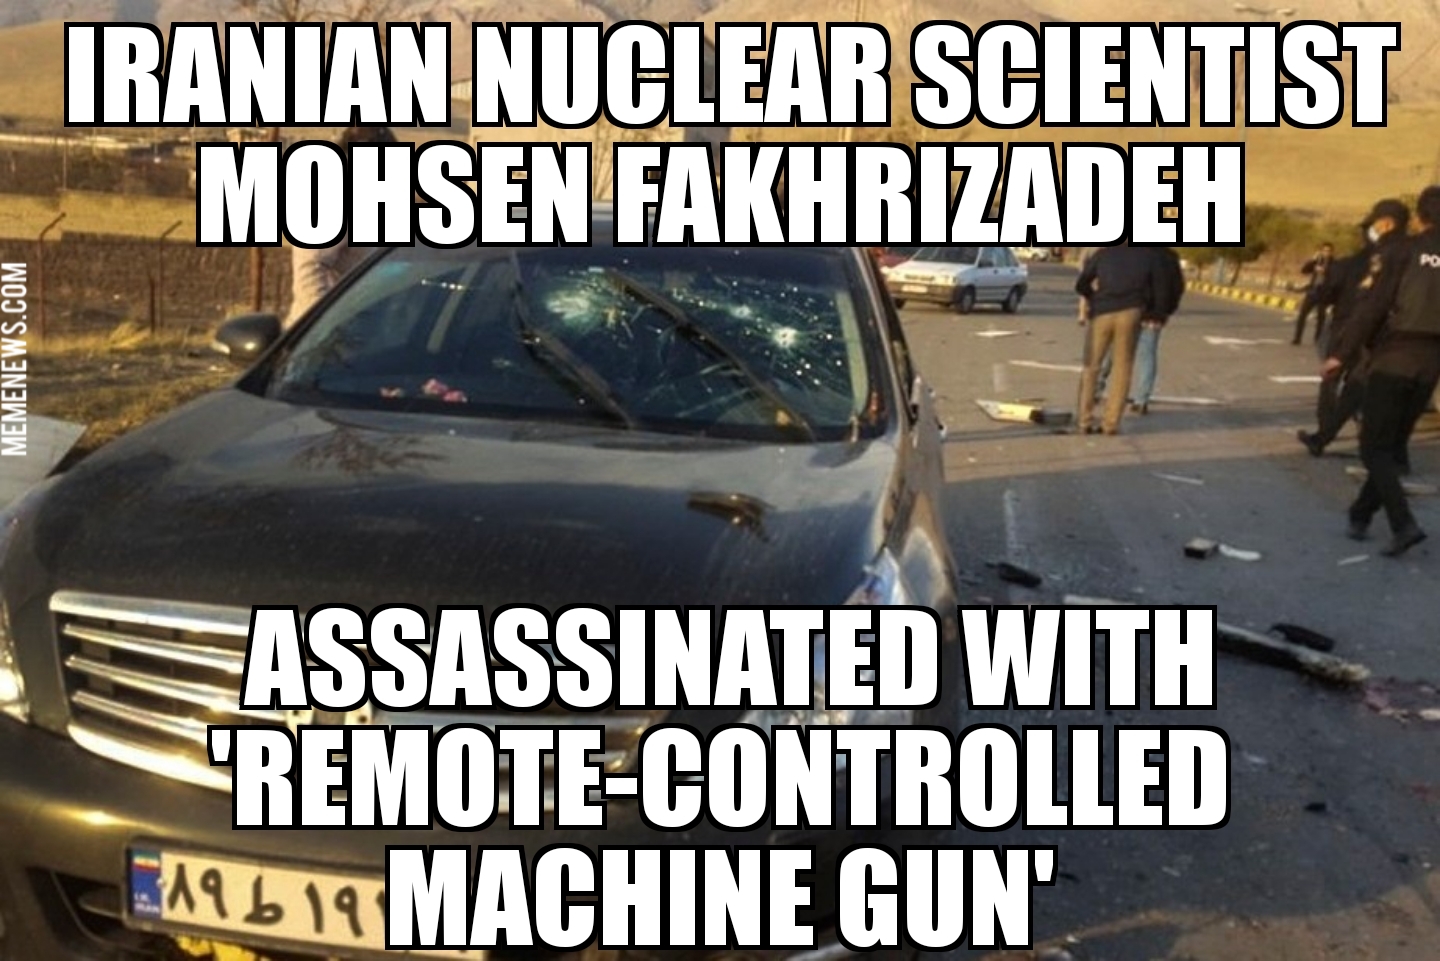 Mohsen Fakhrizadeh killed with ‘remote-controlled machine gun’